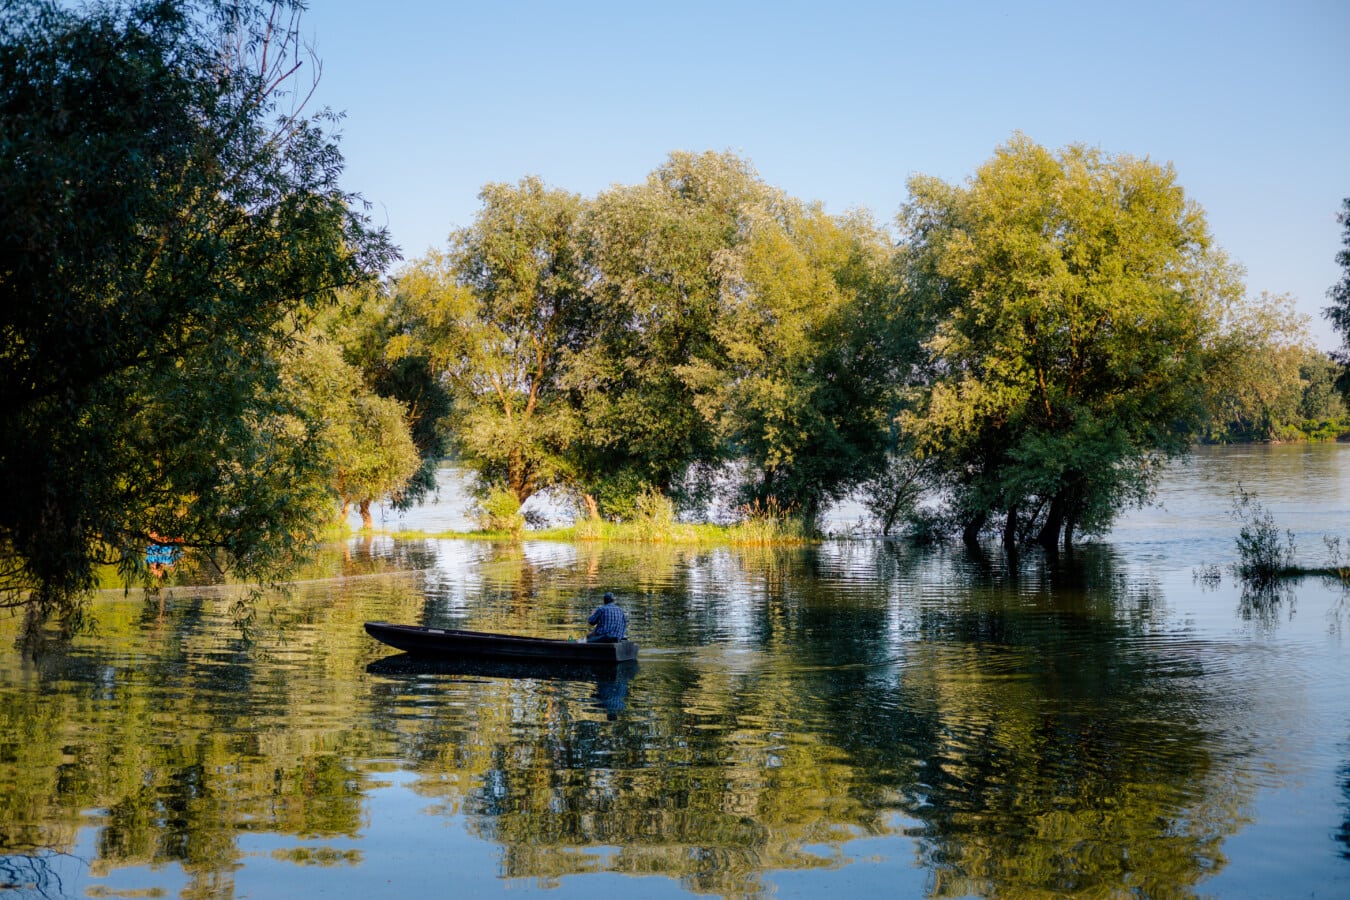 Man in boat on floodplain; photo by <a href="https://pixnio.com/media/paddle-river-boat-man-floodplain-floor">Drazen Nesic</a> on <a href=“https://pixnio.com/">Pixnio</a>.